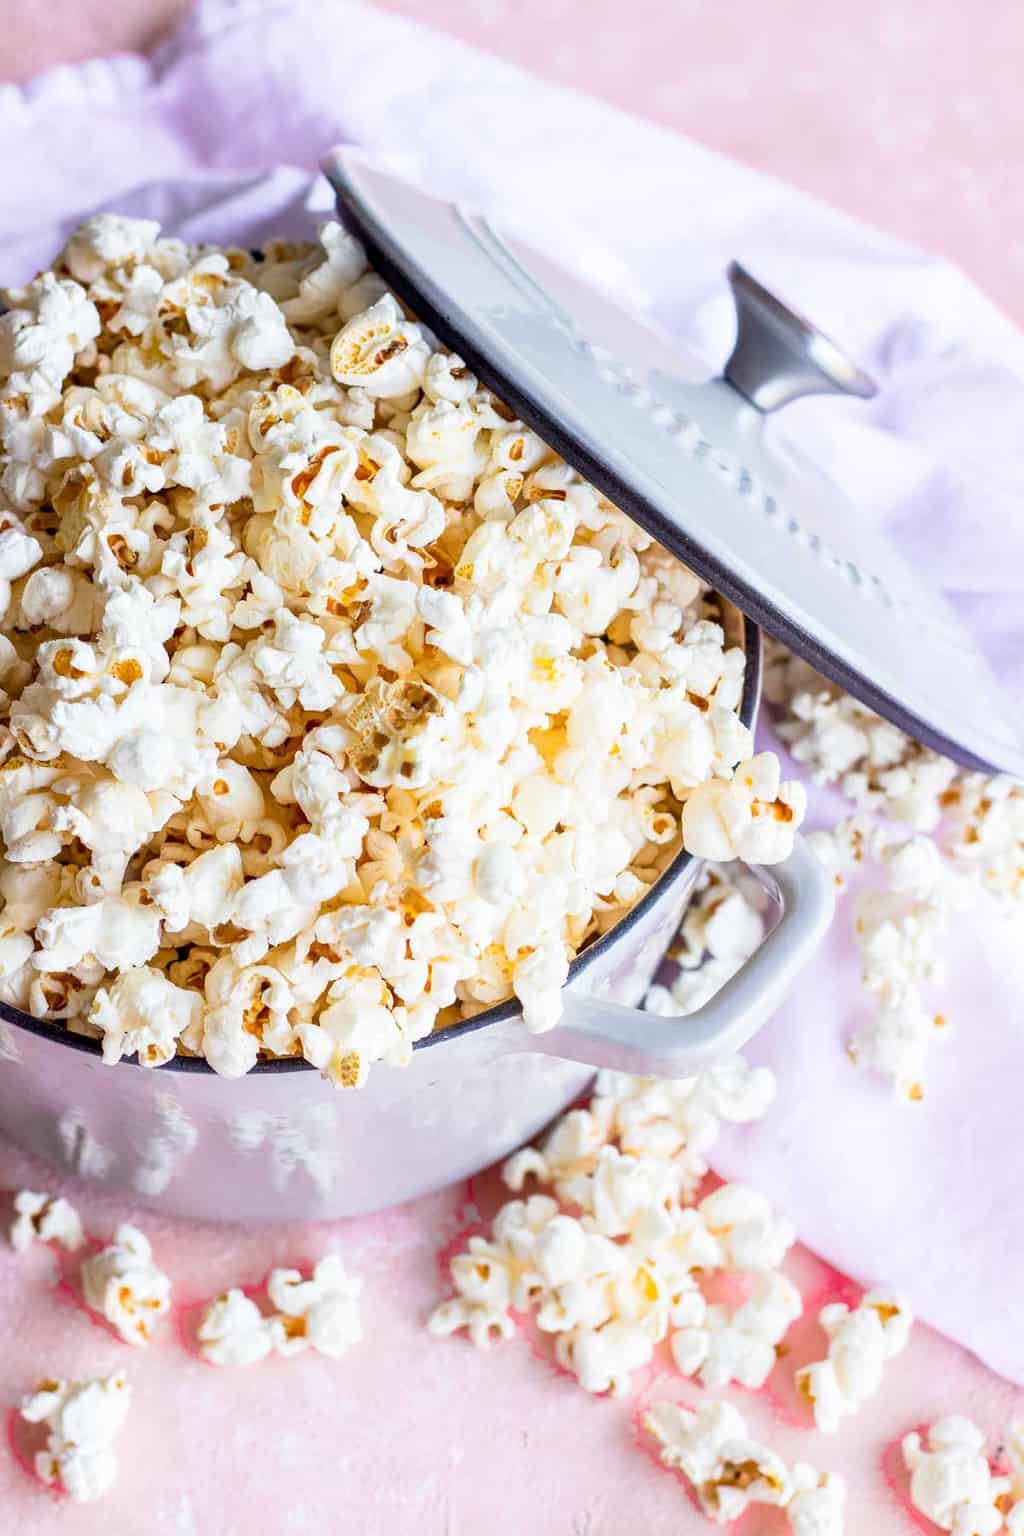 Popcorn Recipes & Instructions by Good Things Baking for Sugar & Cloth